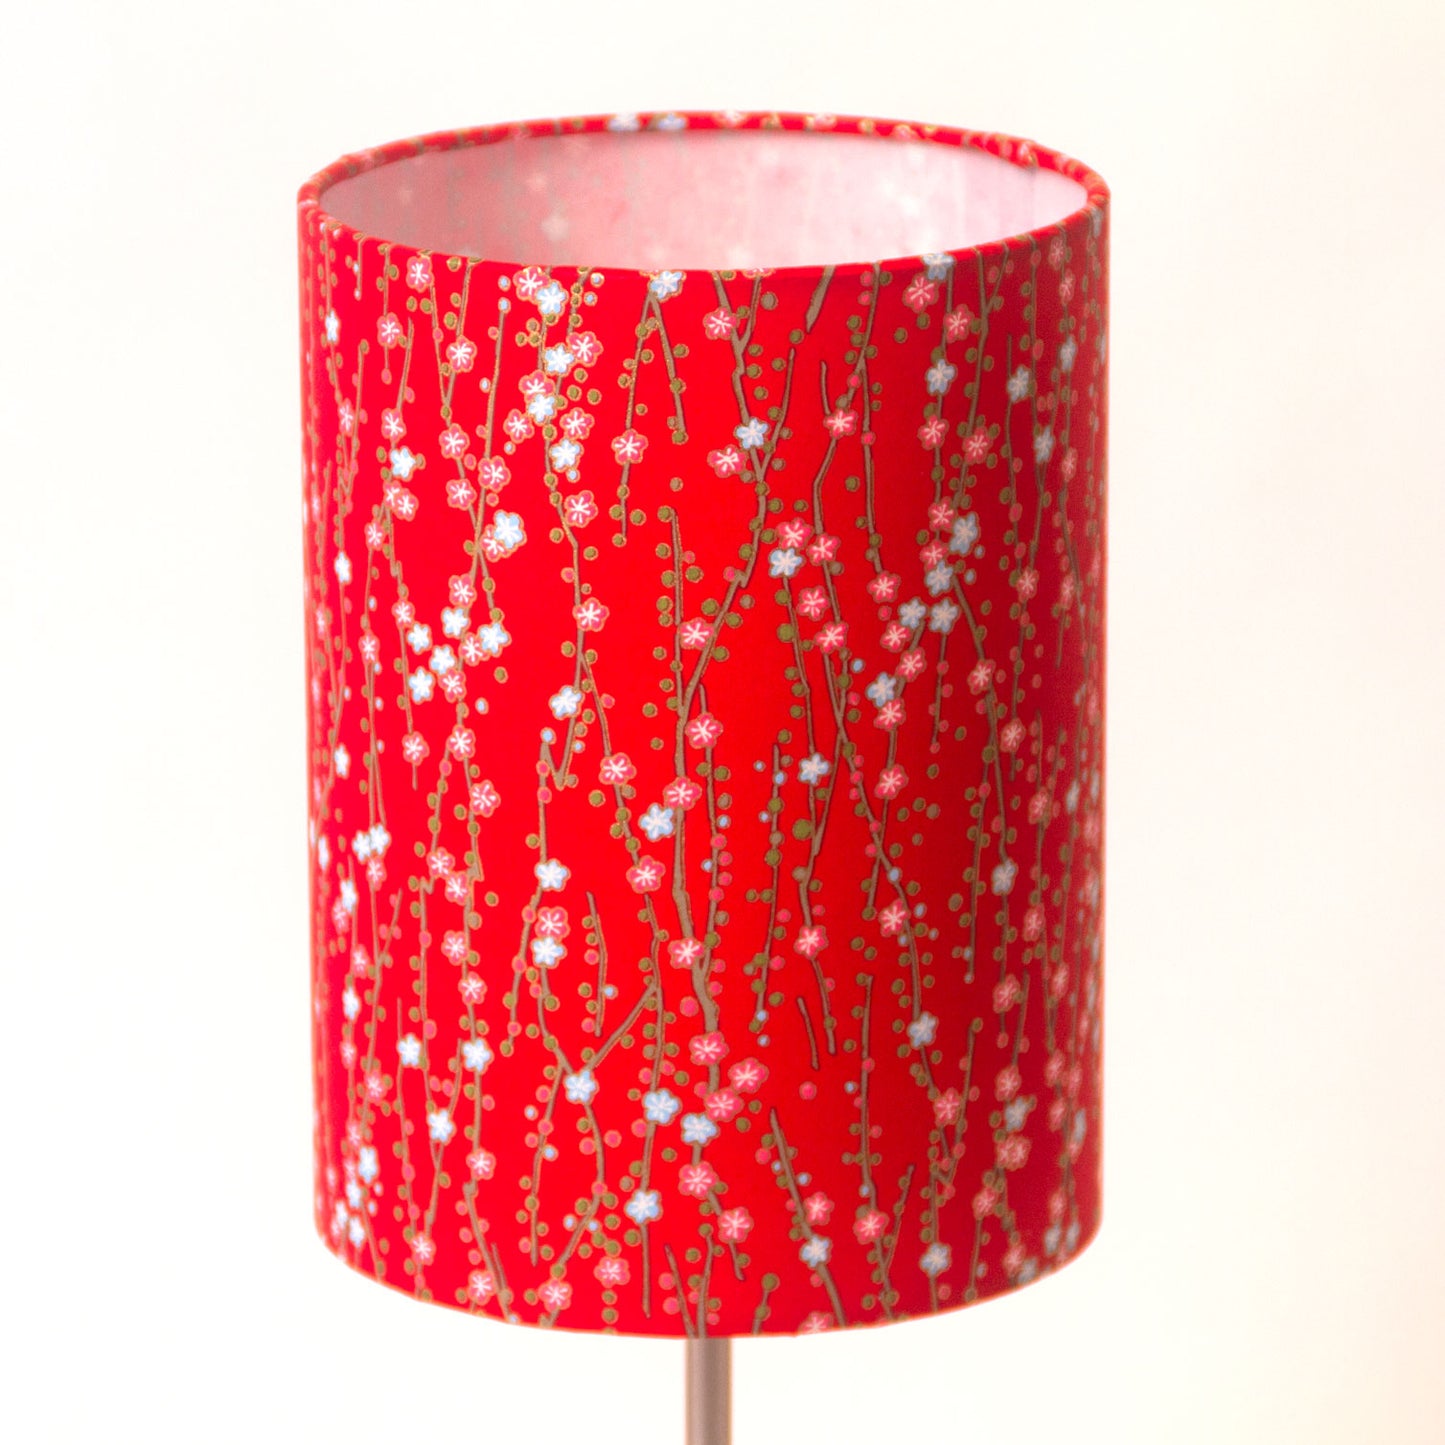 Square Lamp Shade - W01 ~ Red Daisies, 30cm(w) x 30cm(h) x 30cm(d)